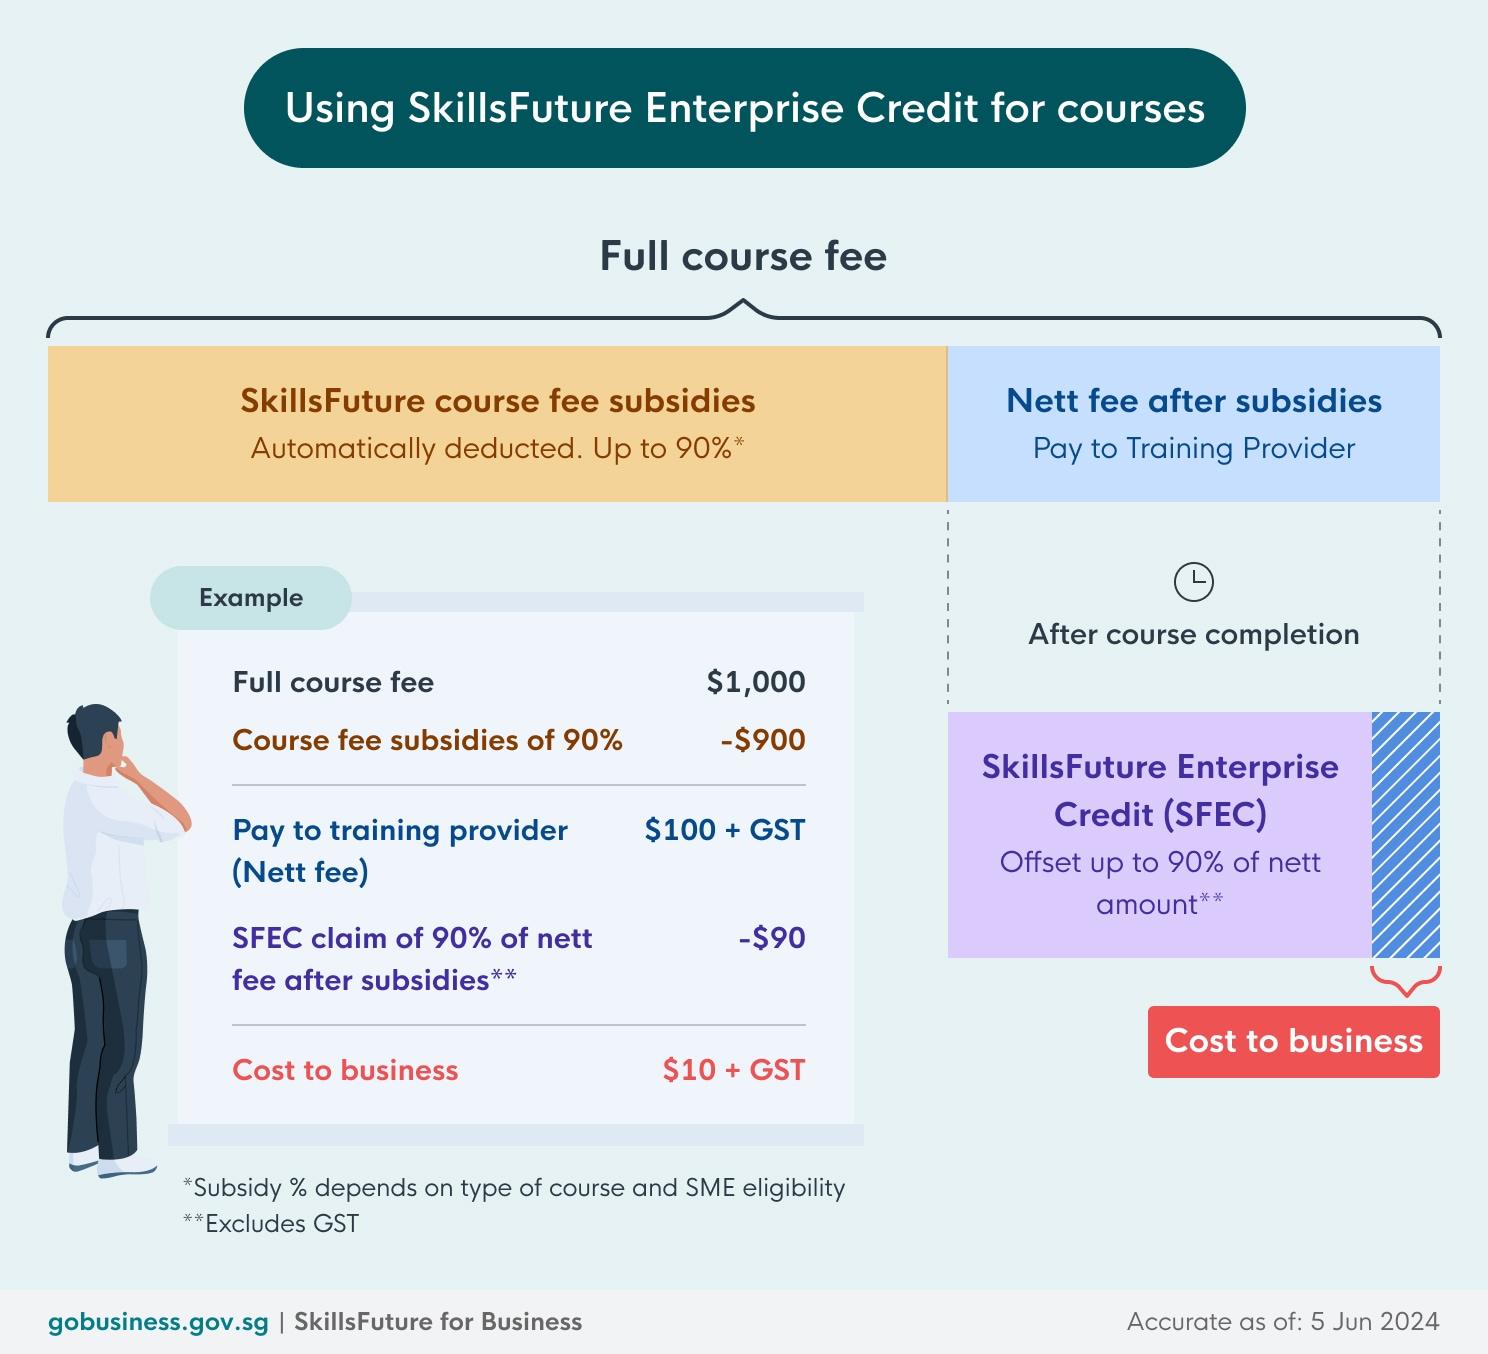 Course subsidies are deducted automatically from course fees. The remainder is paid to training provider. SFEC offsets up to 90% of the amount paid.